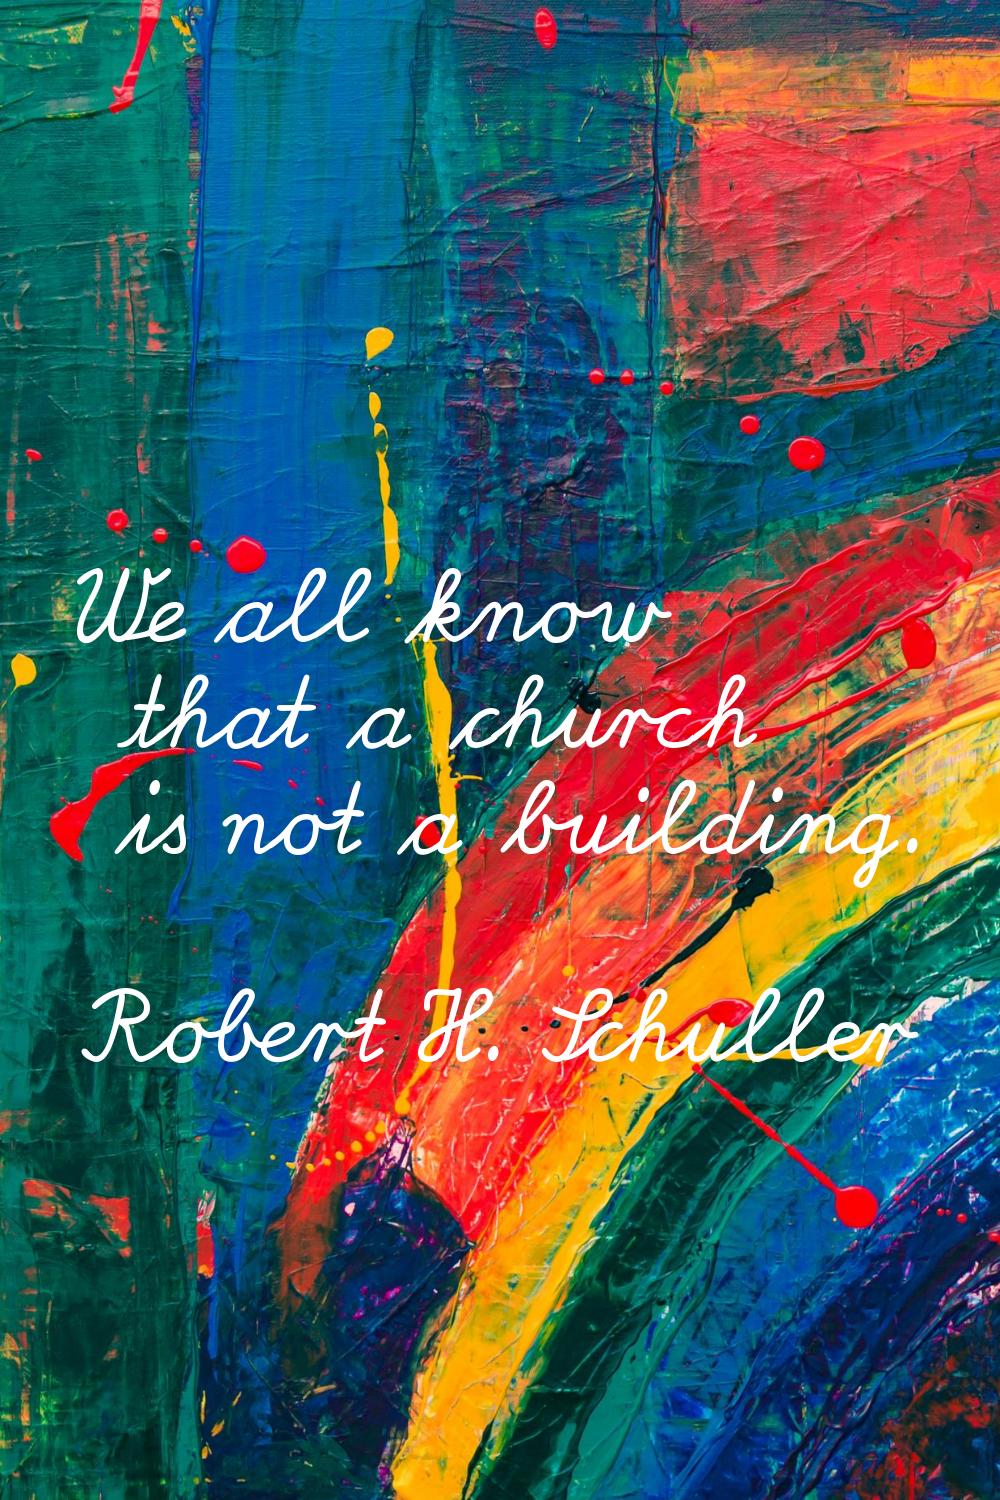 We all know that a church is not a building.